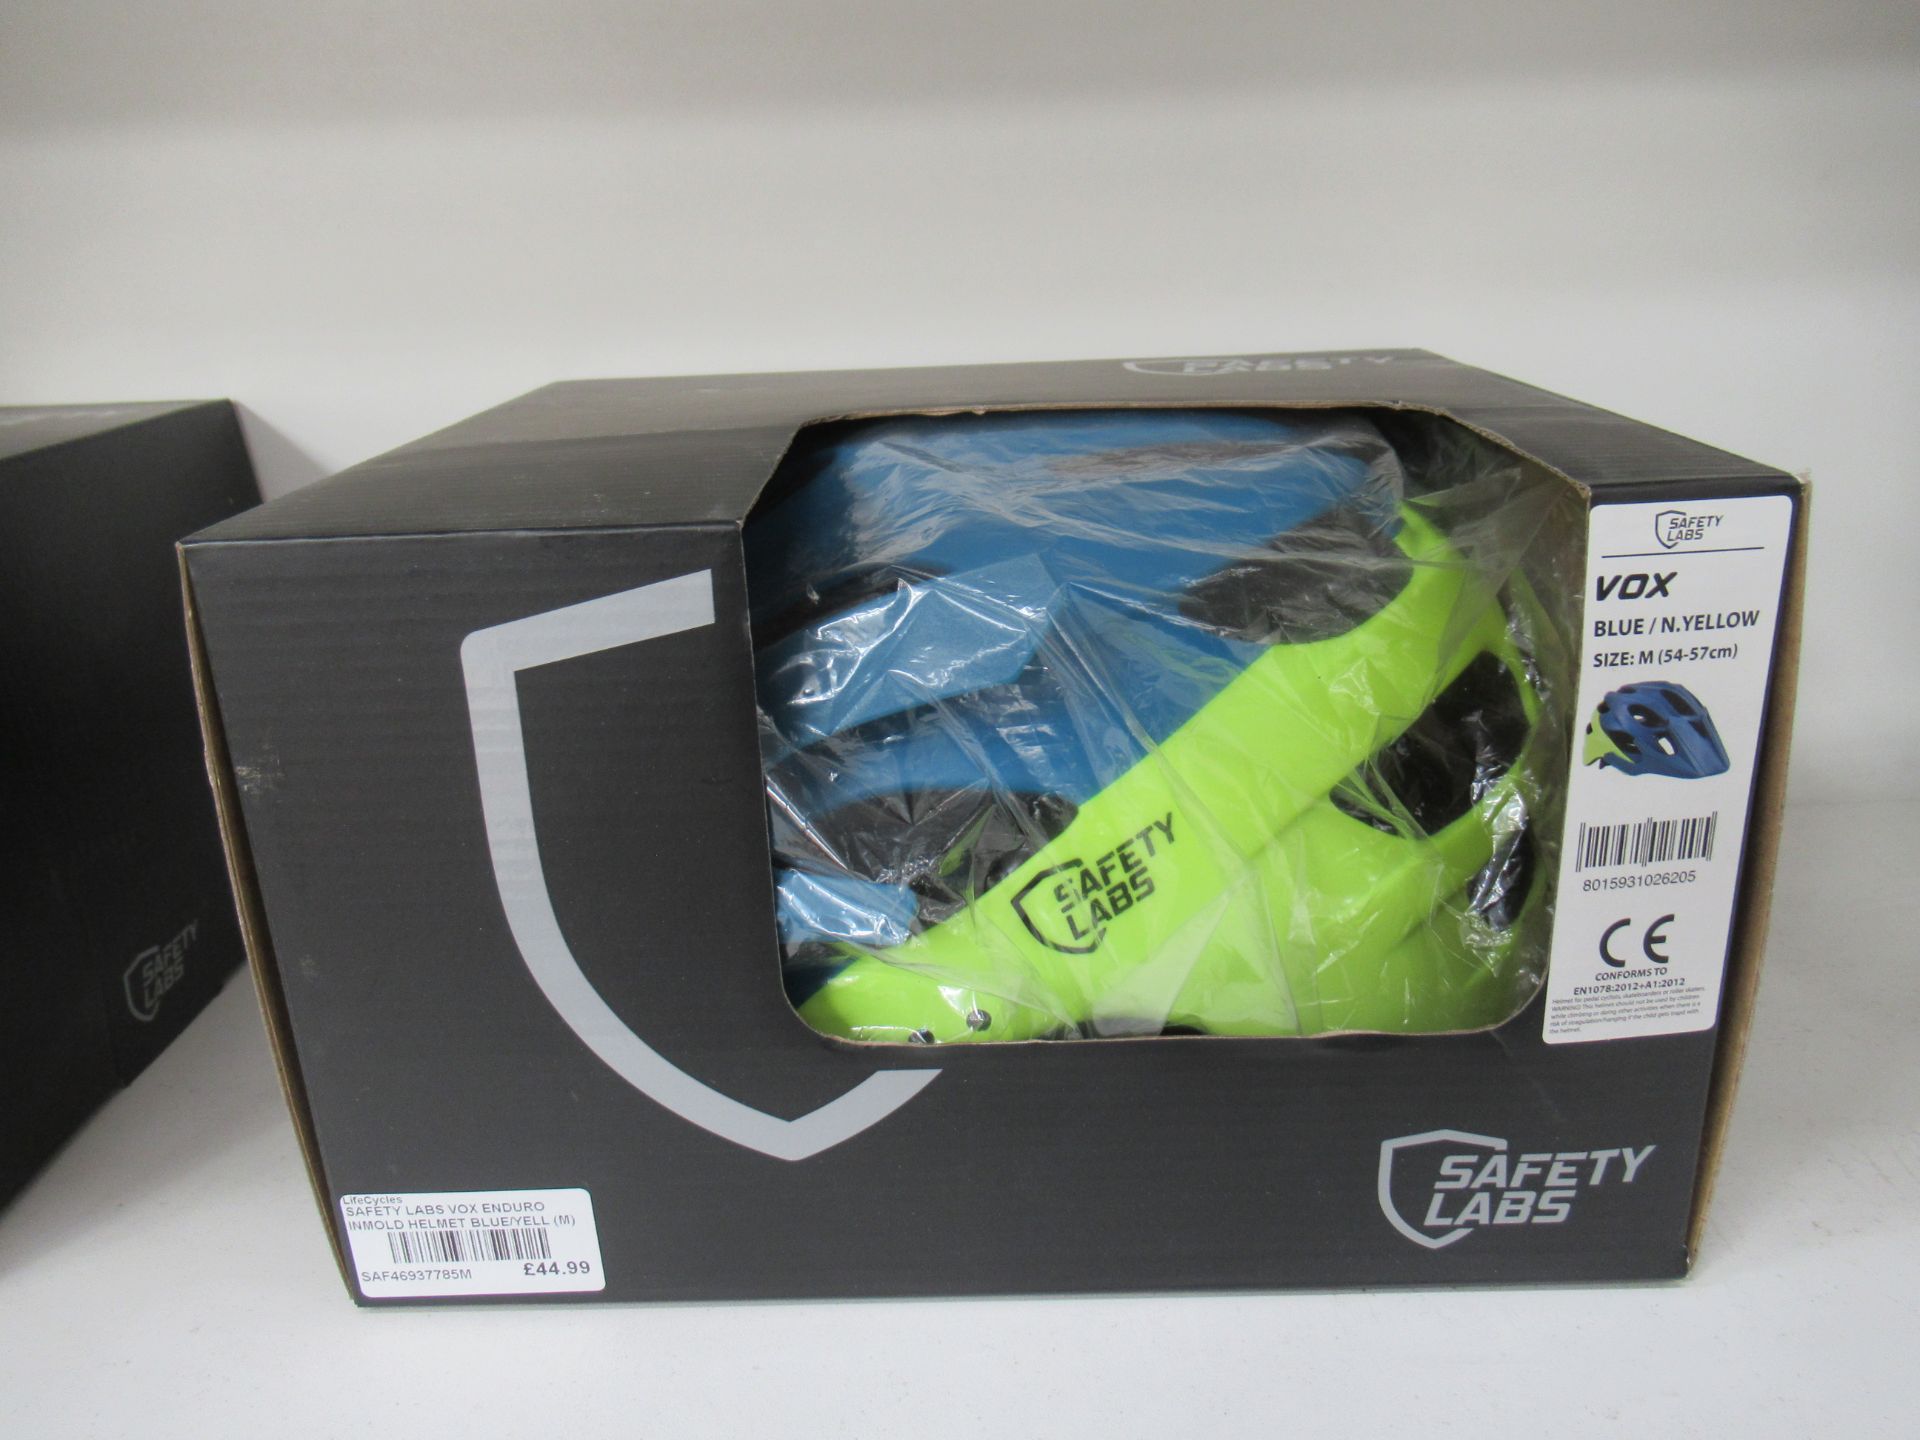 7 x cycling helmets - 3 x unboxed and 4 x Safety Labs VOX helmets: 3 x Blue/Neon Yellow (2 x medium; - Bild 7 aus 8